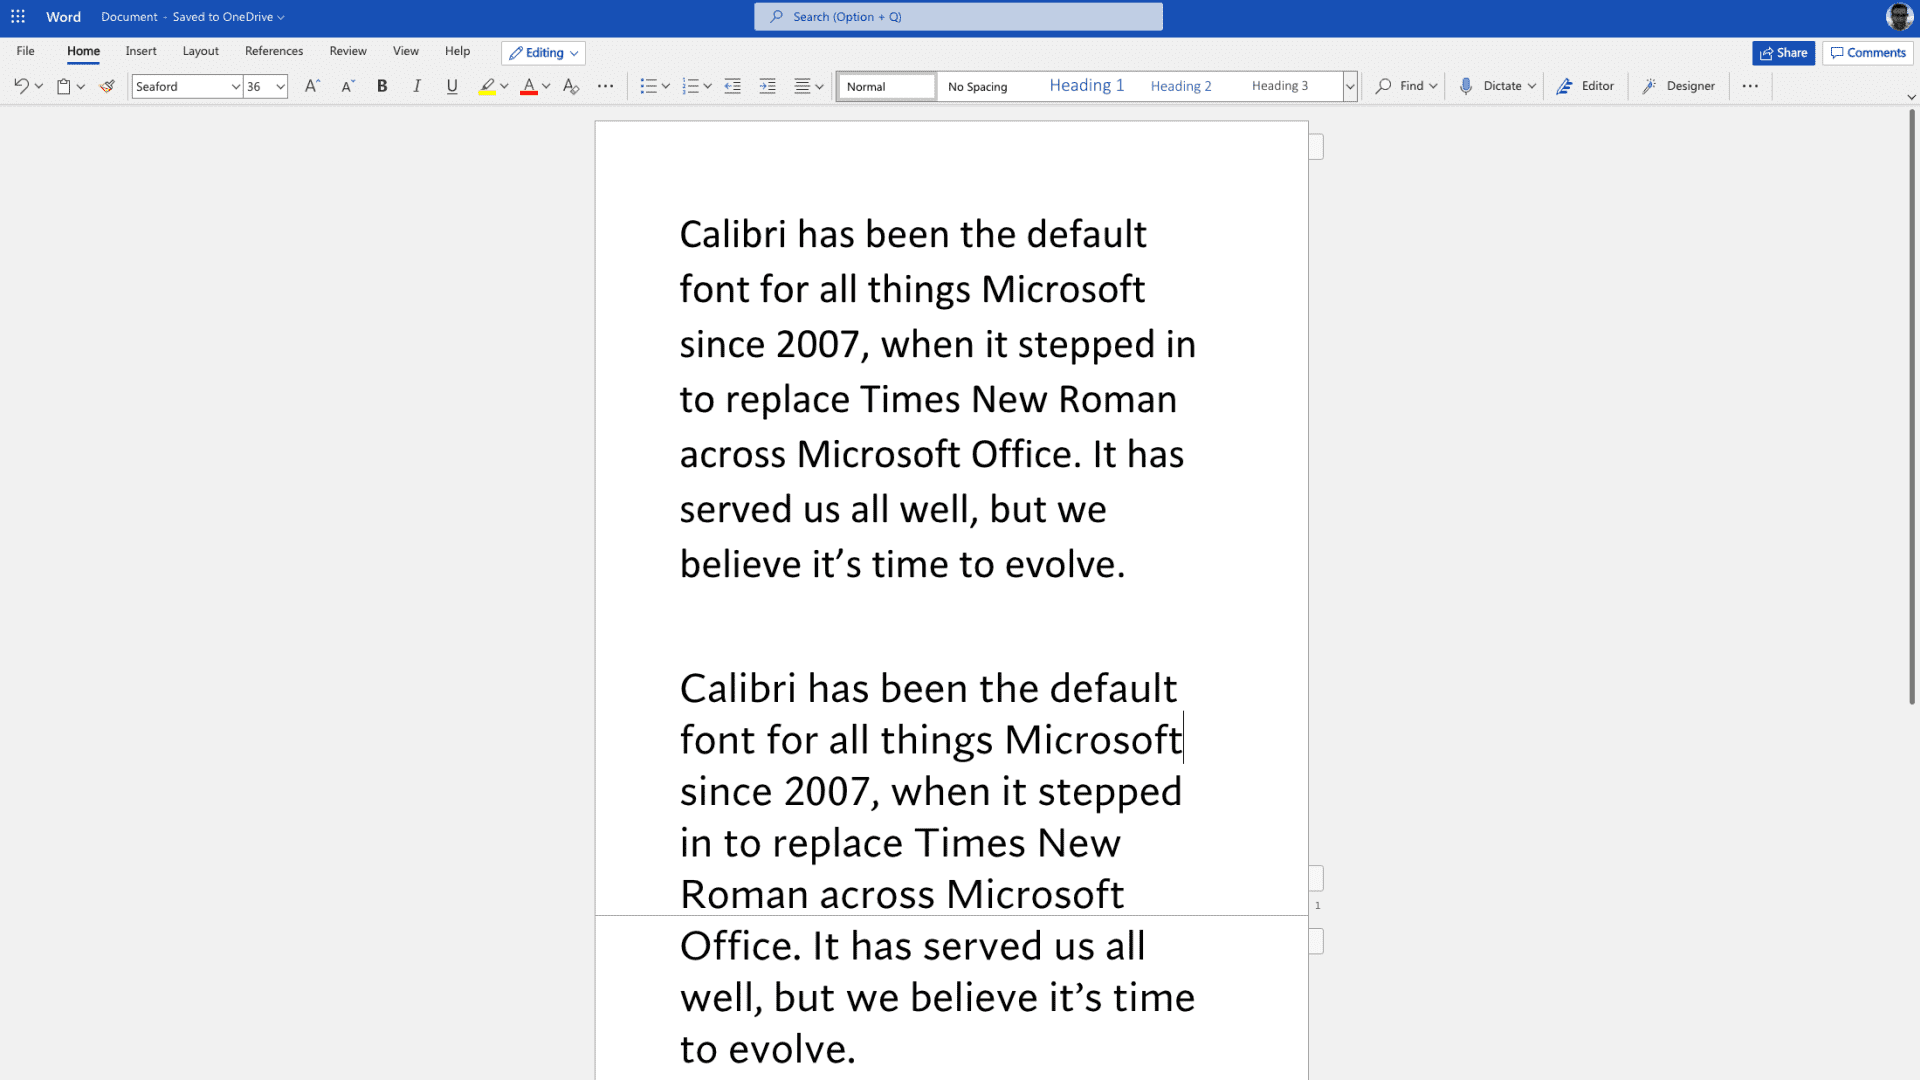 The five new fonts Microsoft commissioned are available in Word for Office 365 subscribers. The first paragraph of text is shown in Calibri, and the second paragraph appears in the new Seaford font.